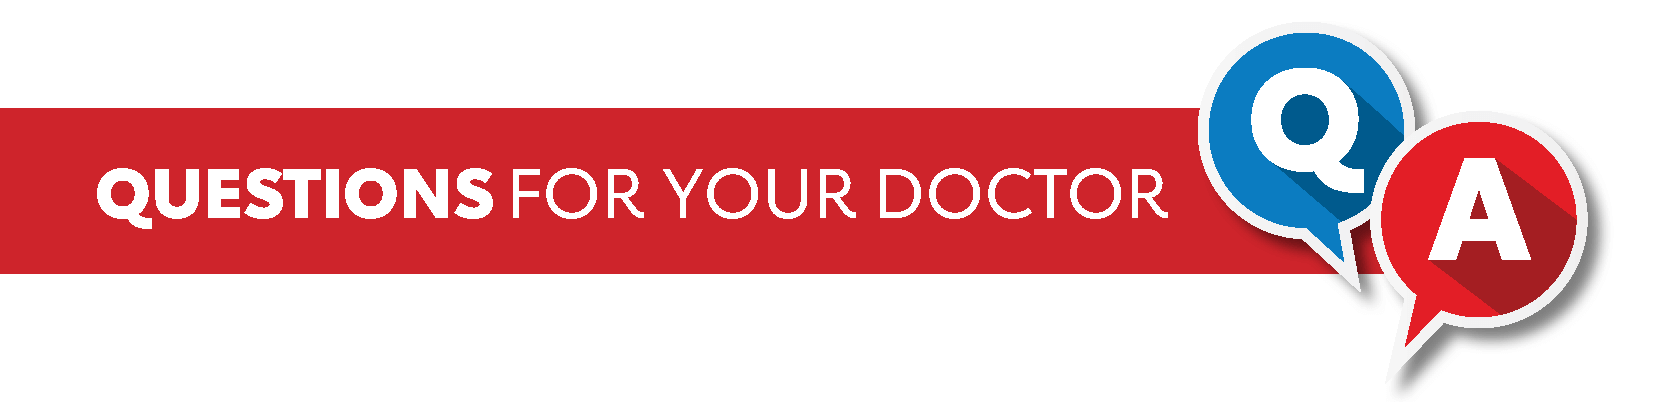 Questions for Your Doctor banner